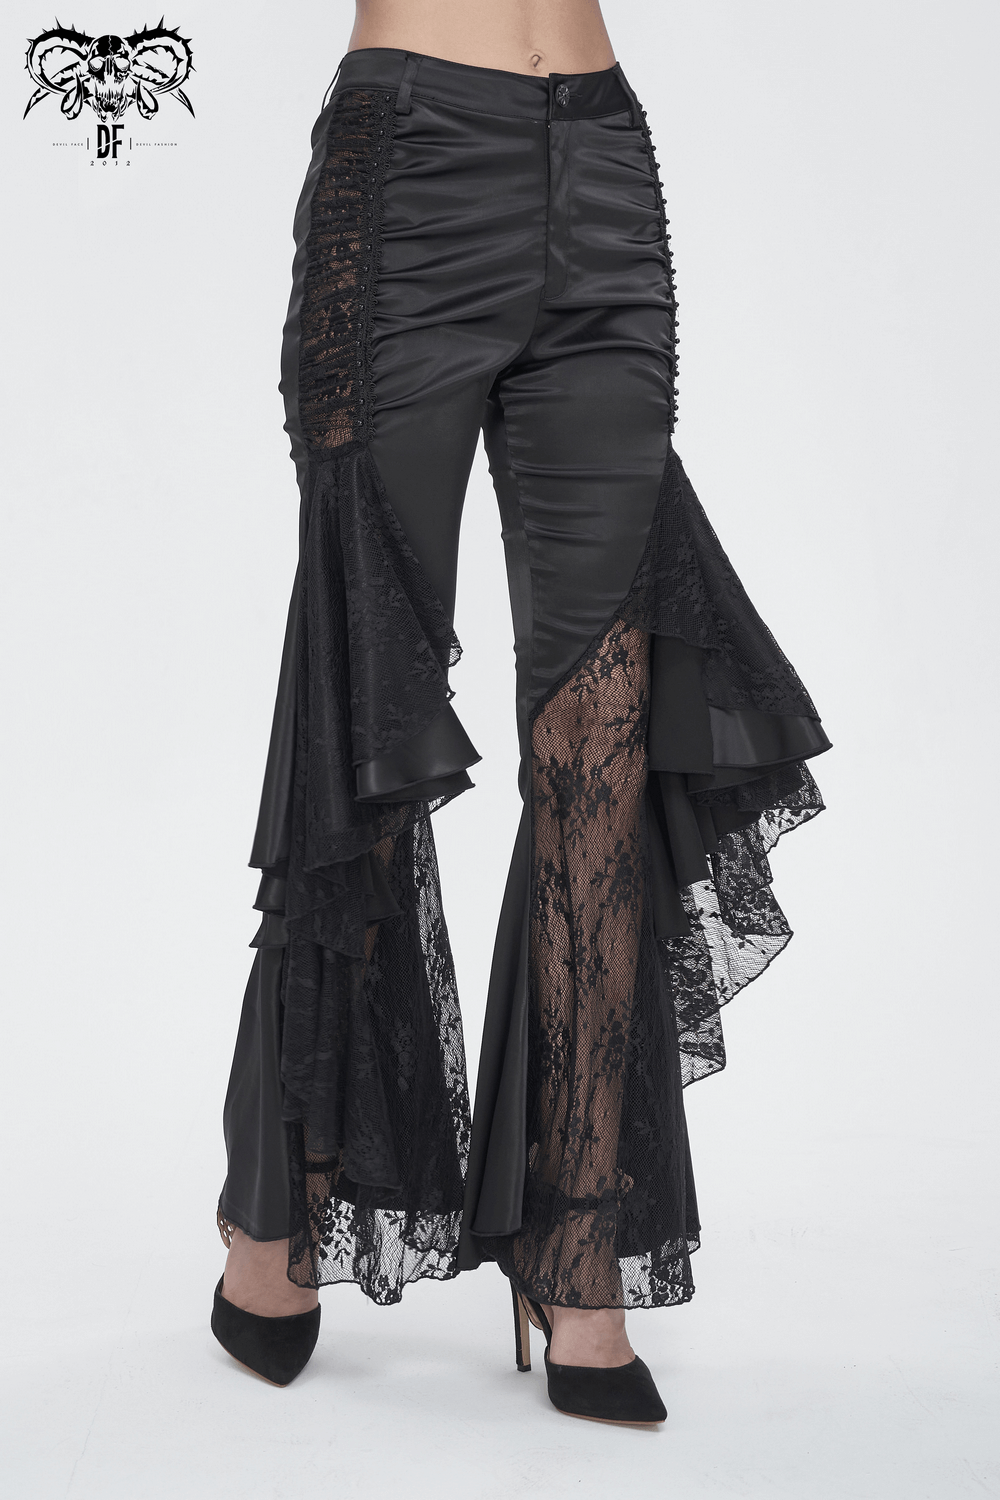 Chic Lace-Paneled Ruffle Flared Pants for Evenings